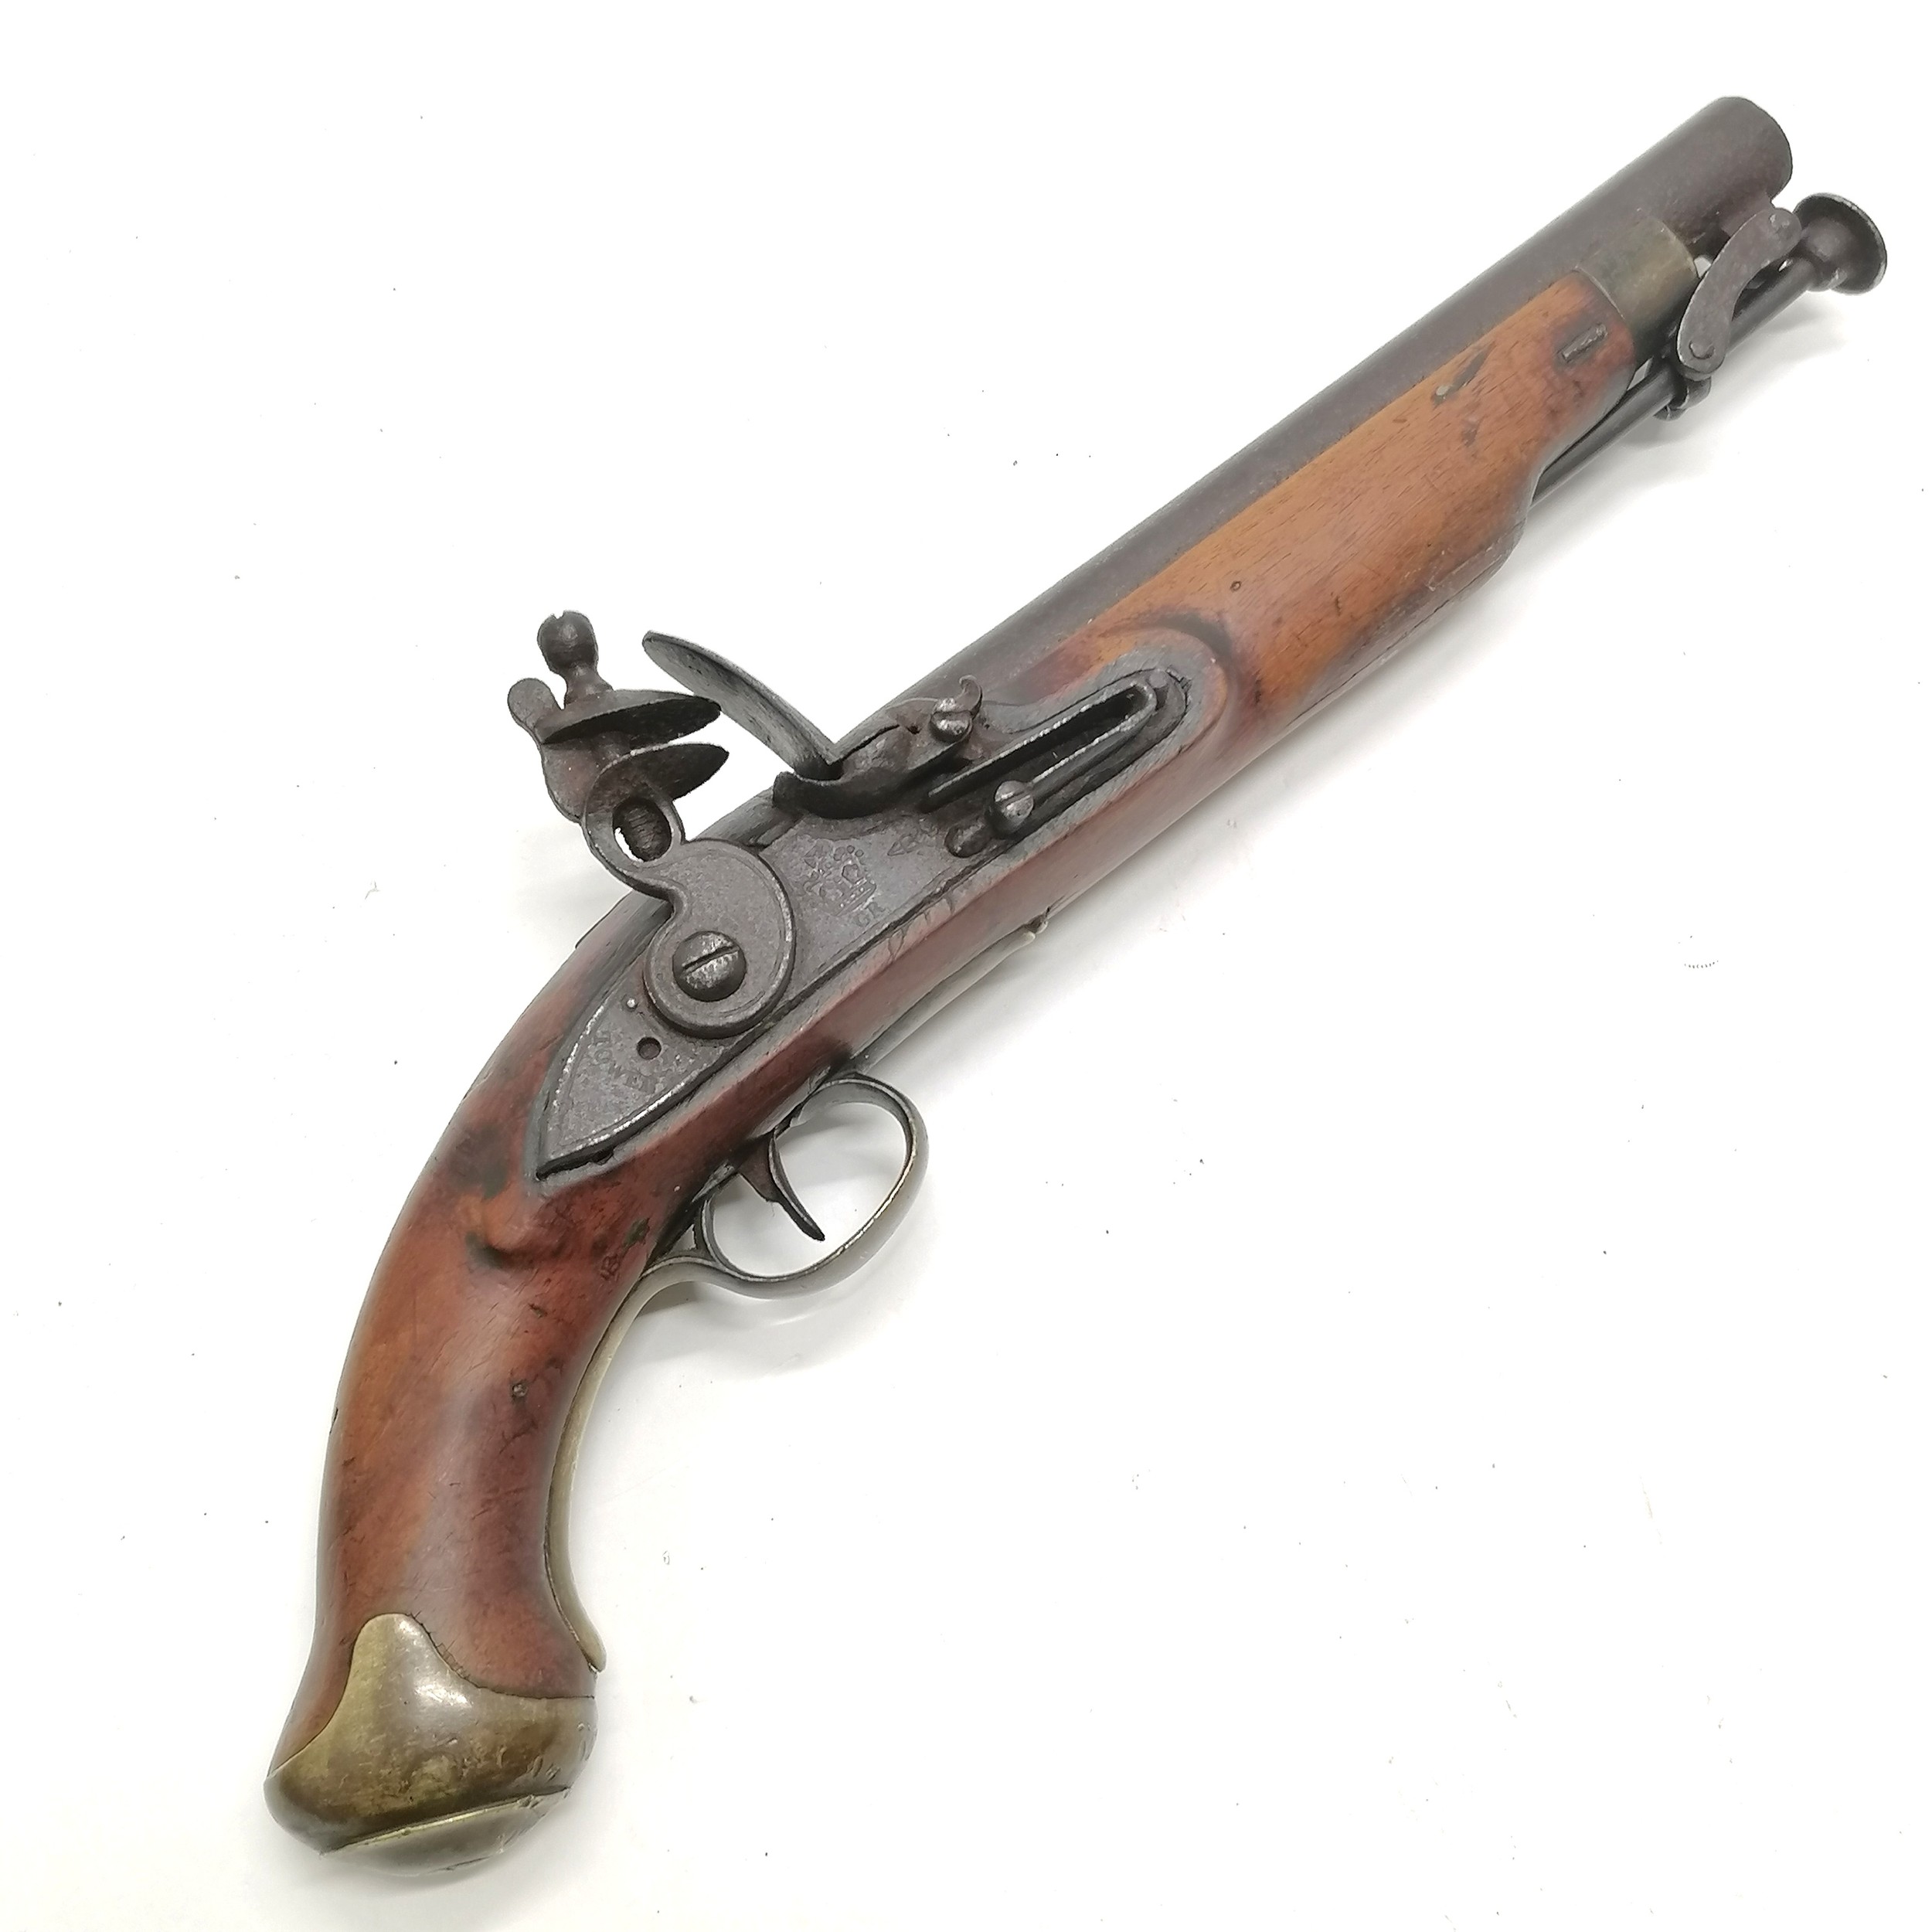 Antique c.1800 tower lock flintlock pistol with GR crown mark and has touchmarks to barrel & stamped